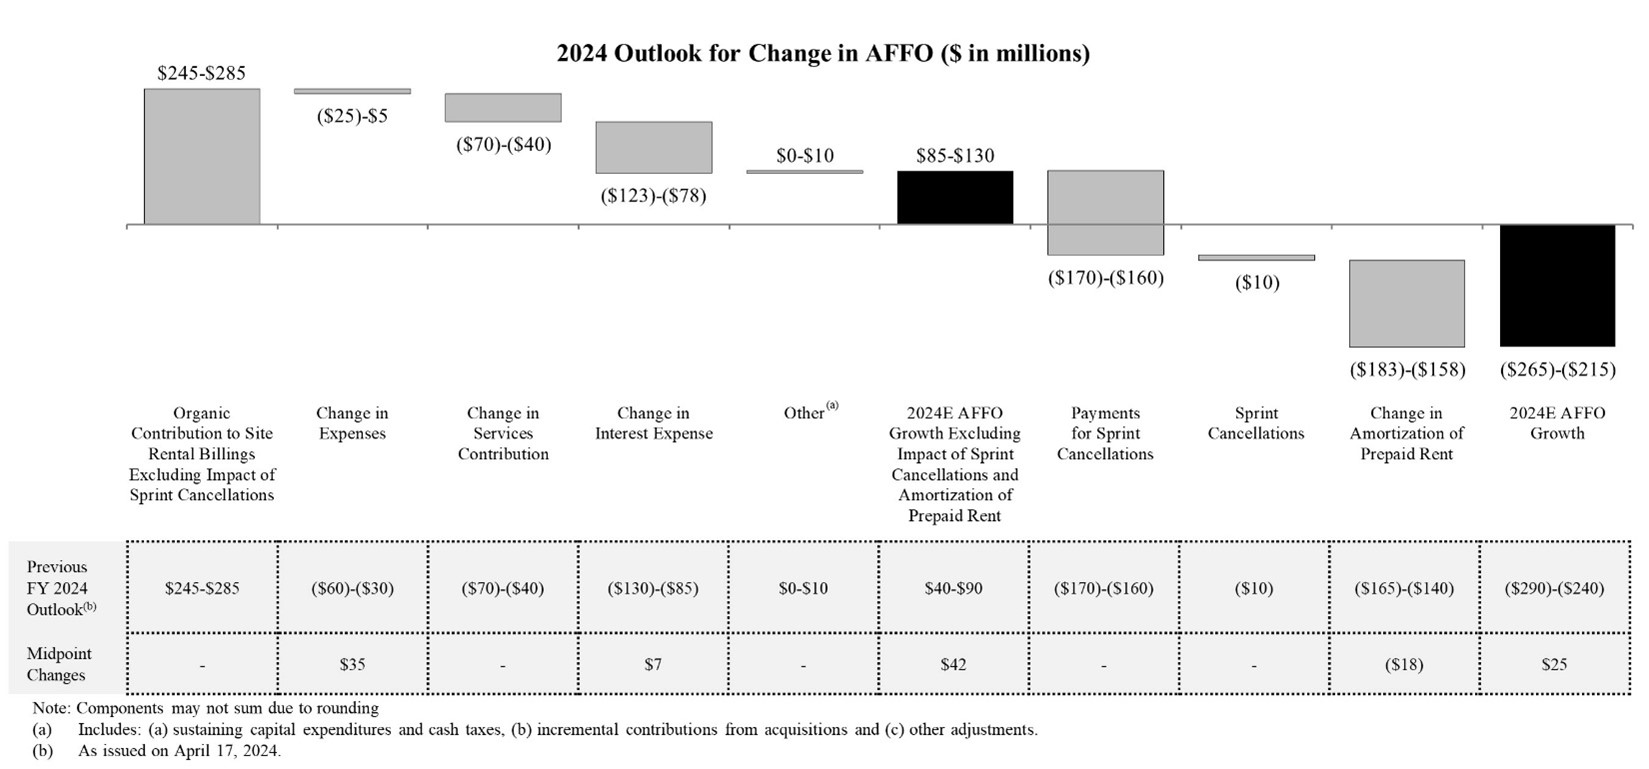 2024 Outlook for Change in AFFO ($ in millions)